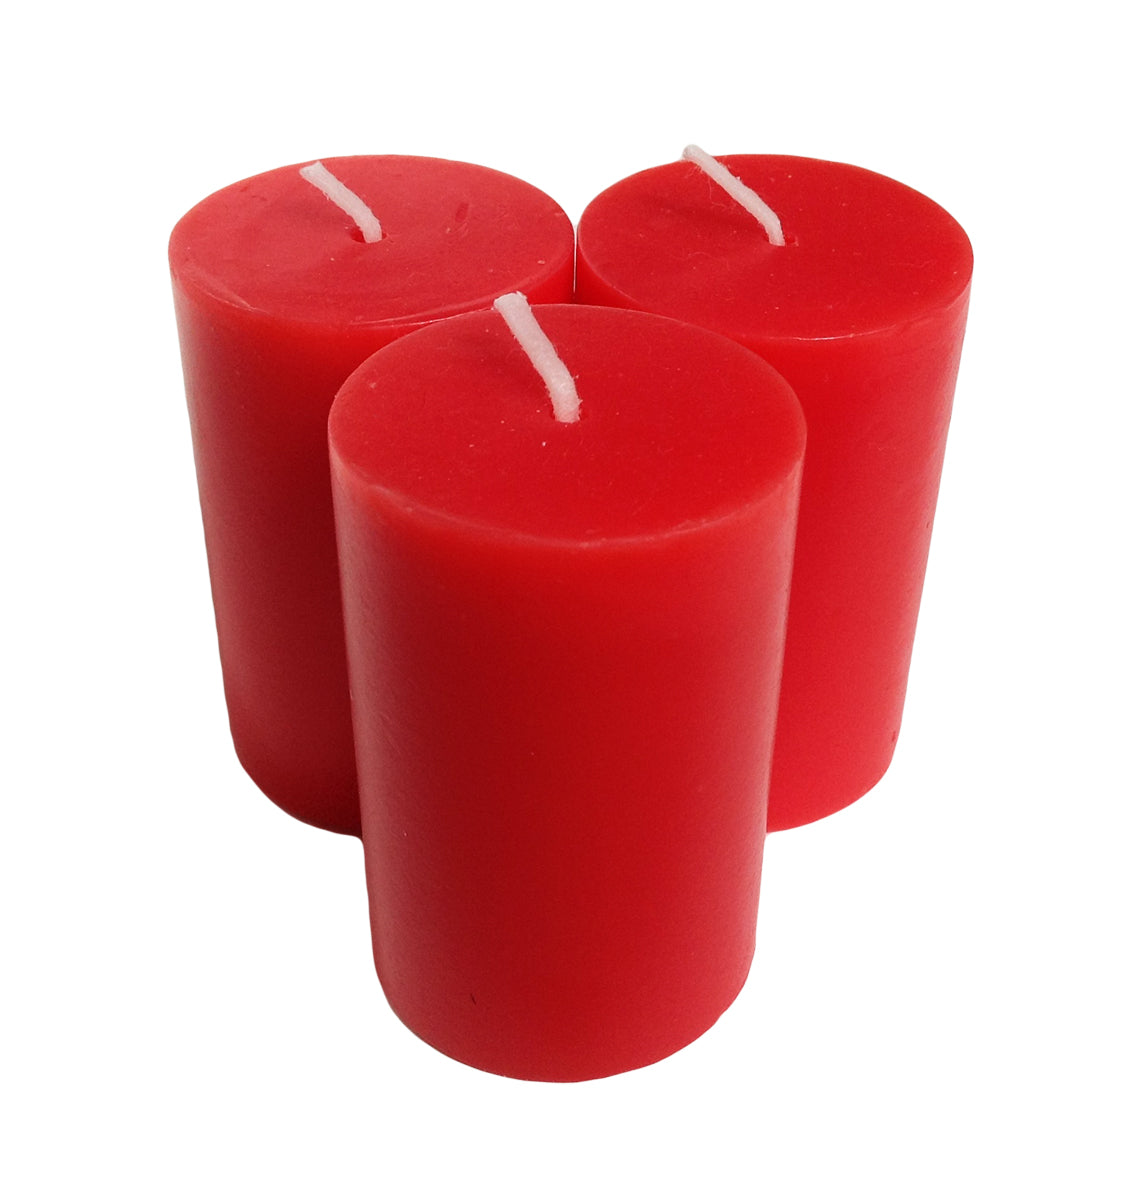 Red Pillar Candles size 7 x 4.3cm - Pack of 3